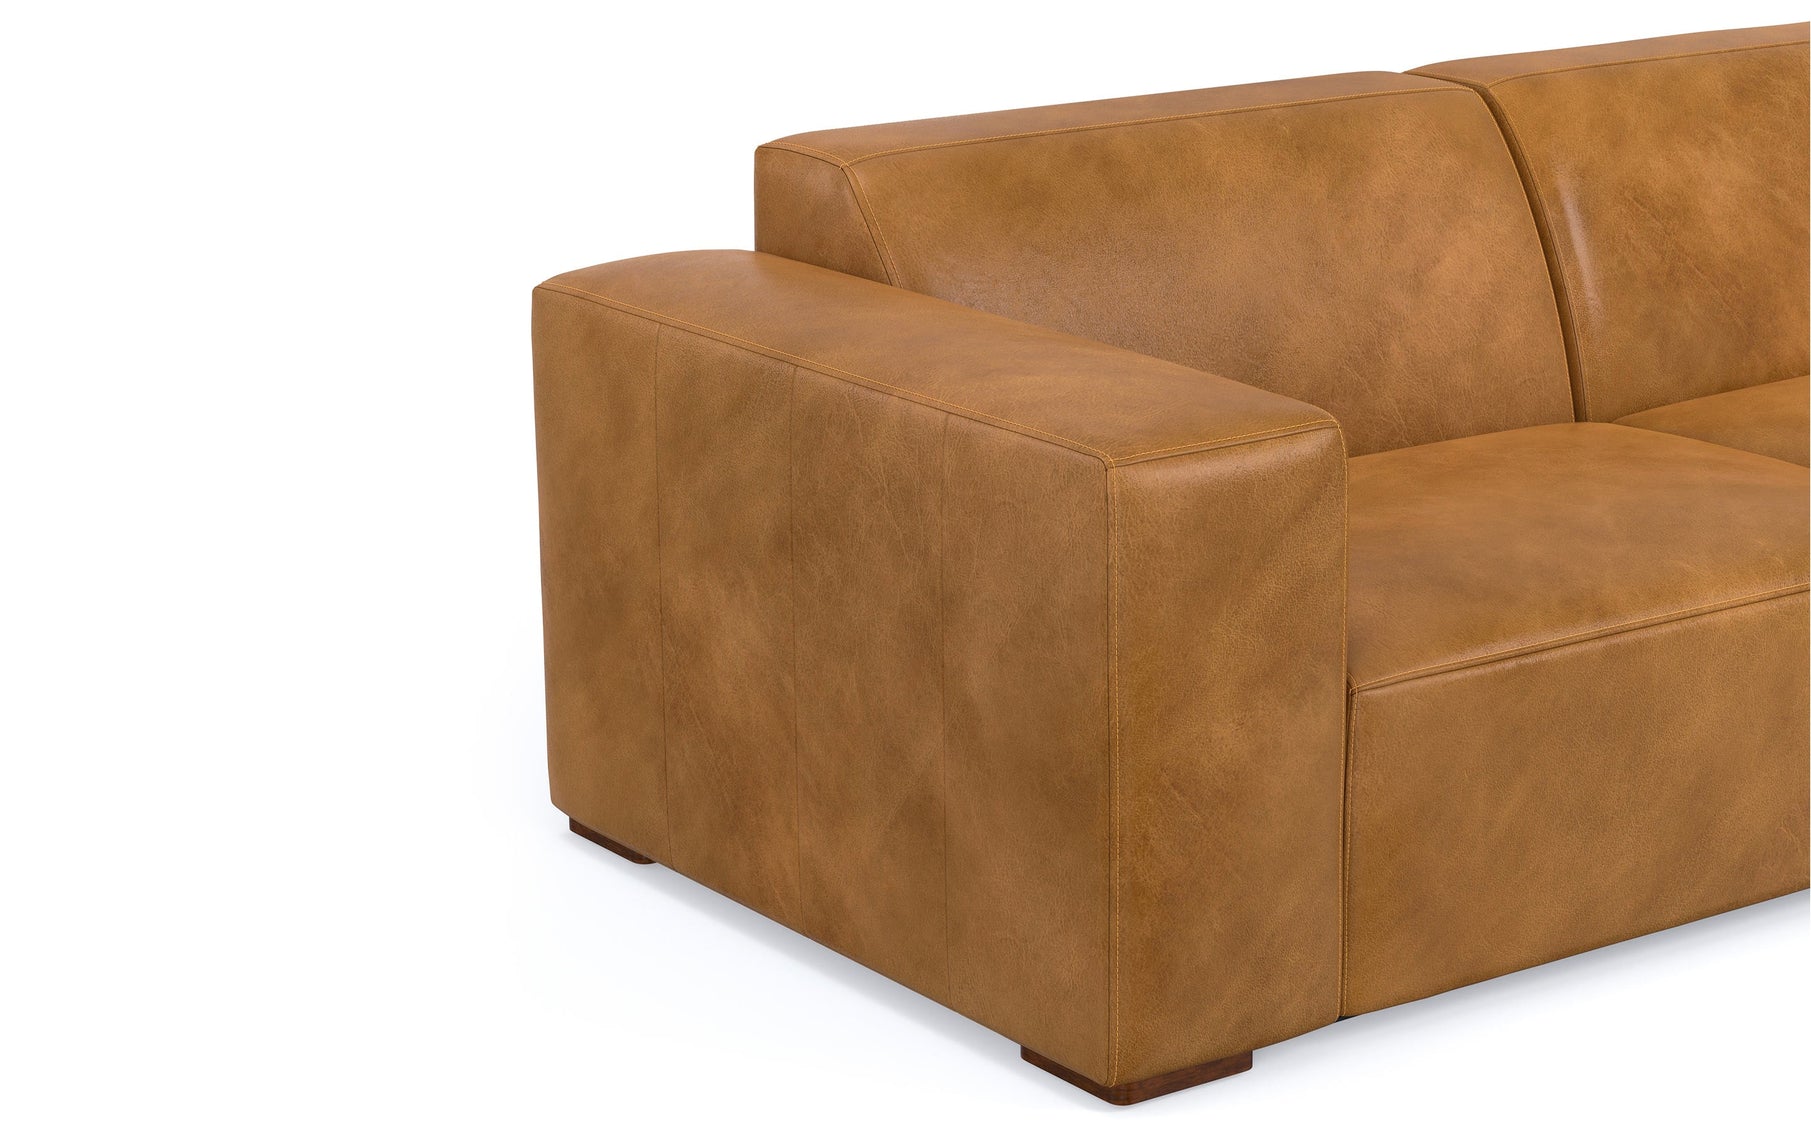 Sienna Genuine Leather | Rex 3 Seater Sofa and Ottoman in Genuine Leather